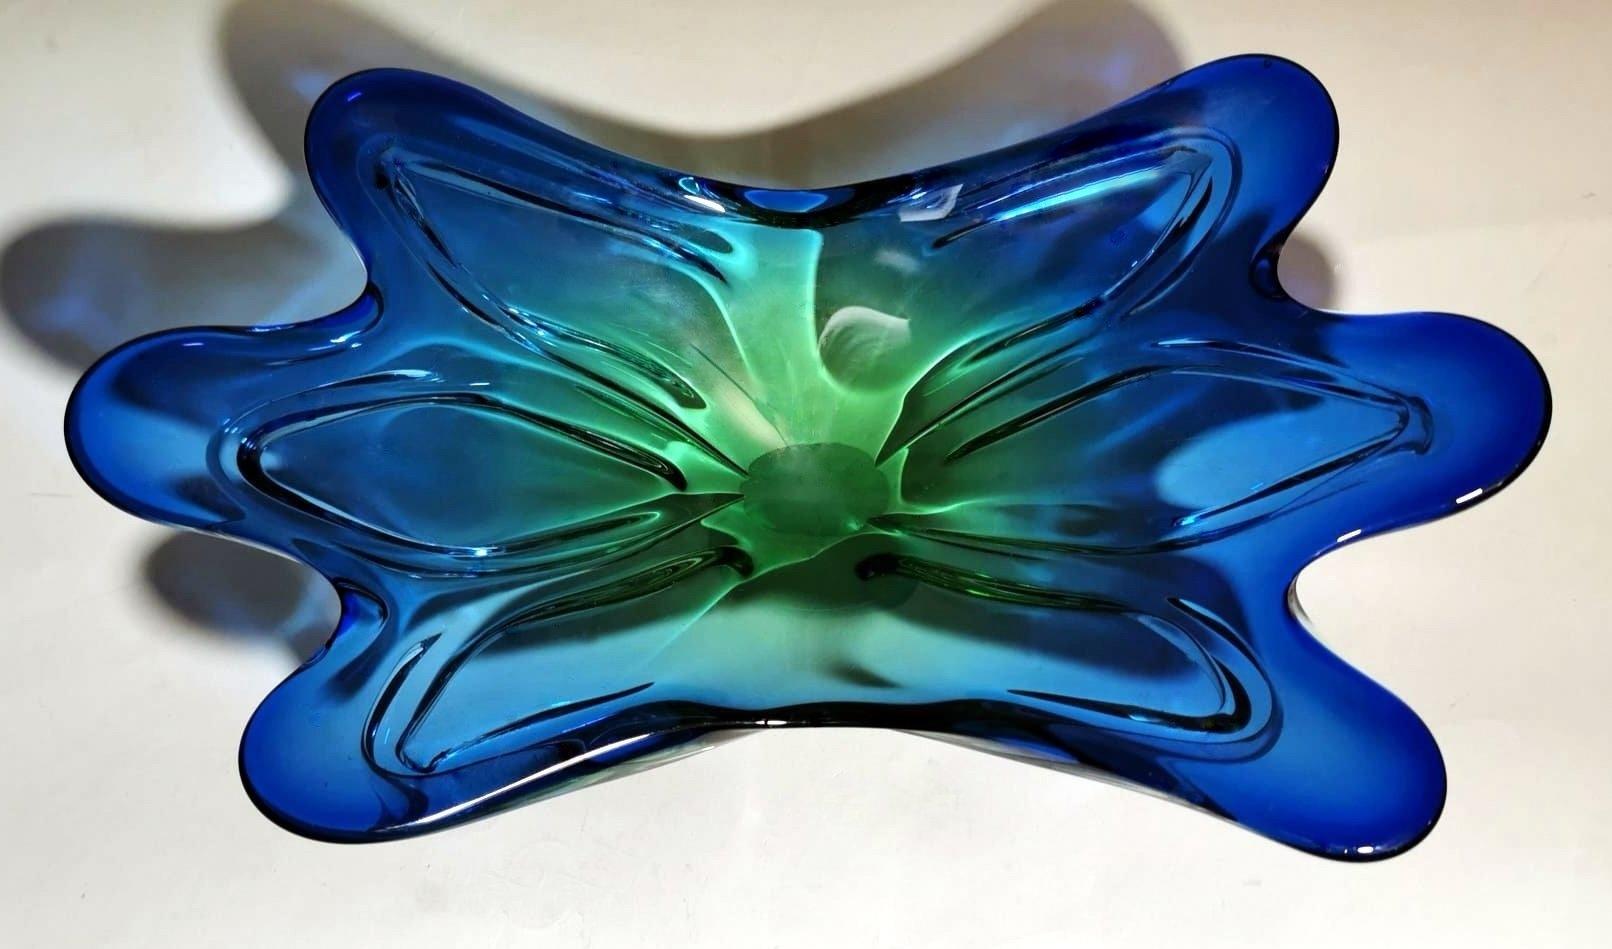 We kindly suggest you read the whole description, because with it we try to give you detailed technical and historical information to guarantee the authenticity of our objects.
Exceptional and attractive colored Murano glass table centerpiece; the